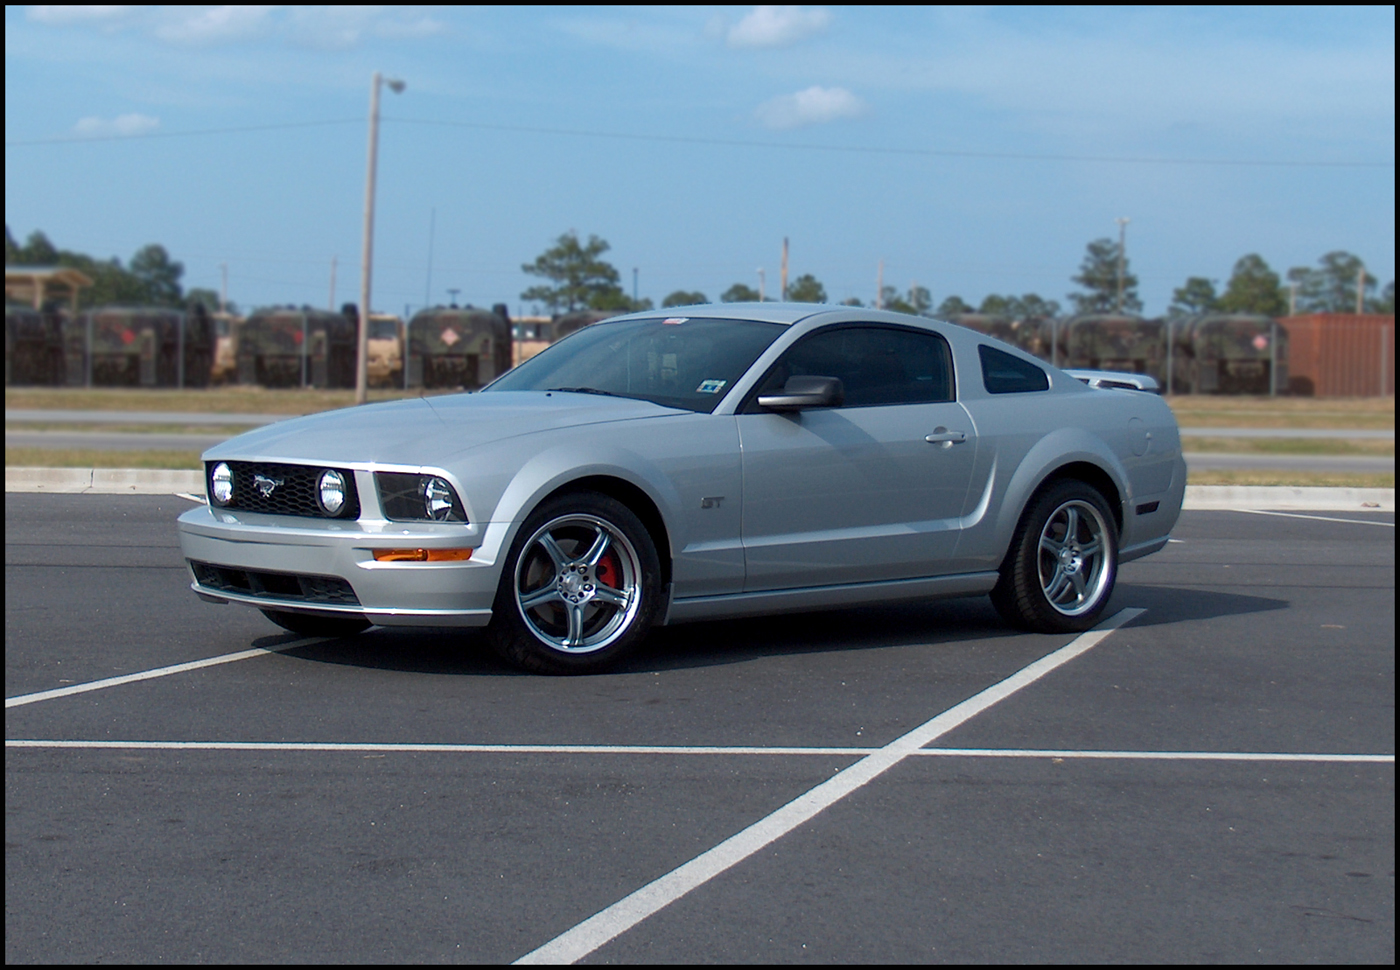 2005 Ford mustang gt 0-60 #7